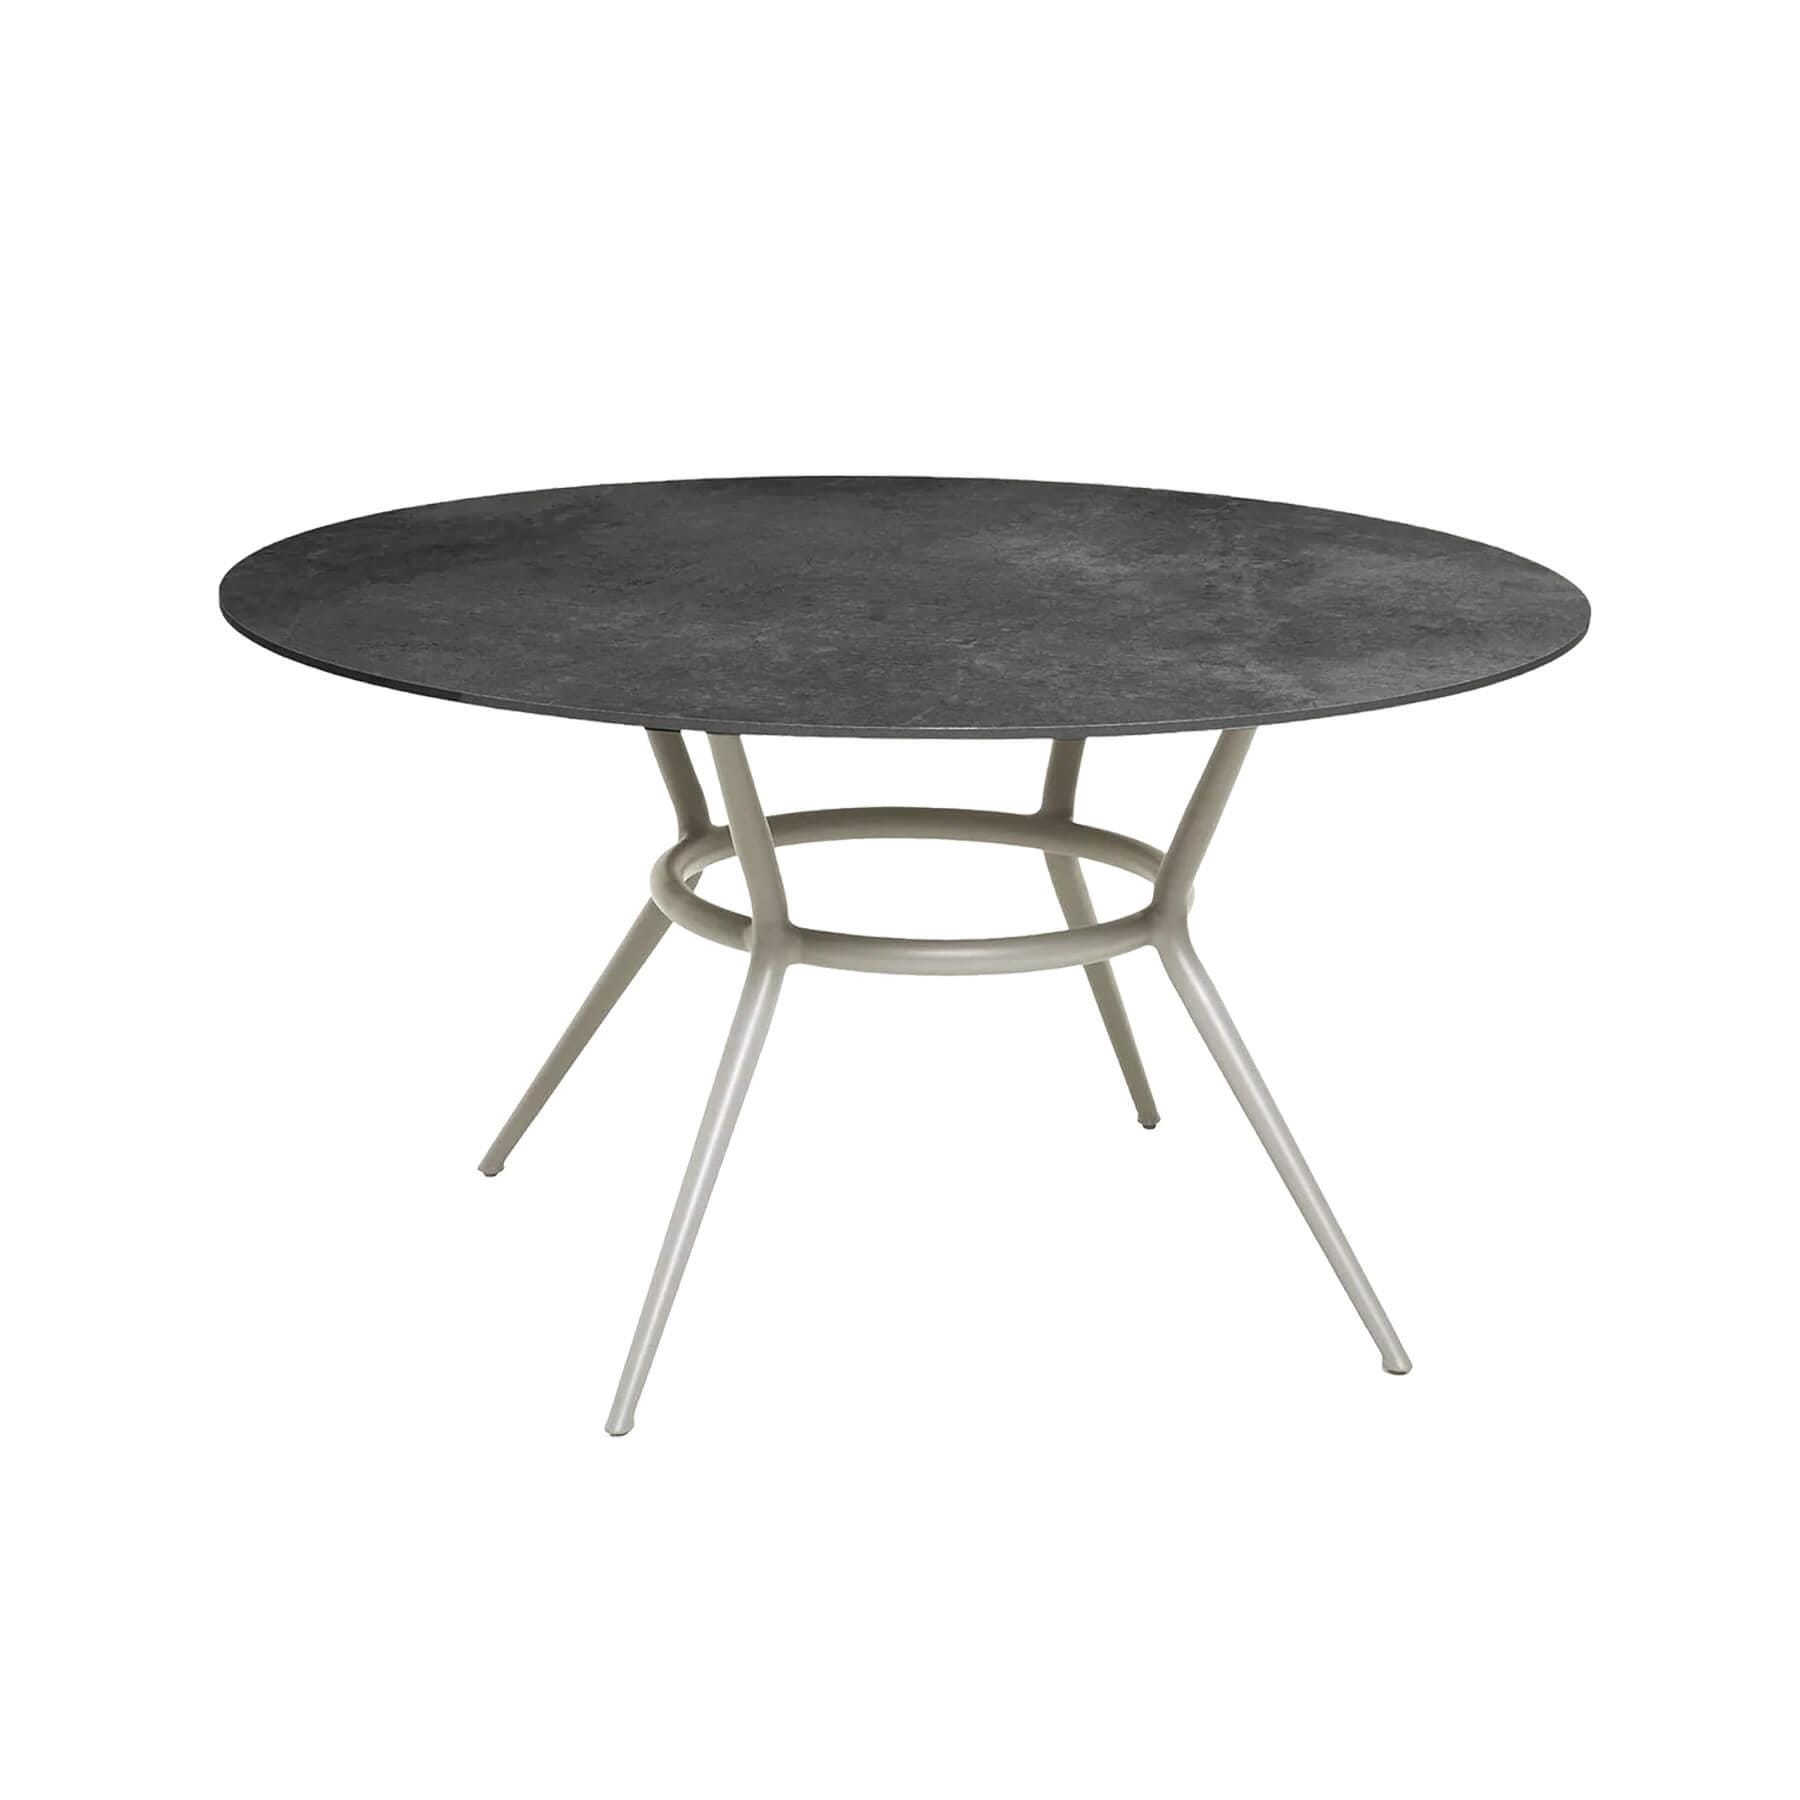 Caneline Joy Outdoor Dining Table Round Ceramic Fossil Black Top Taupe Legs